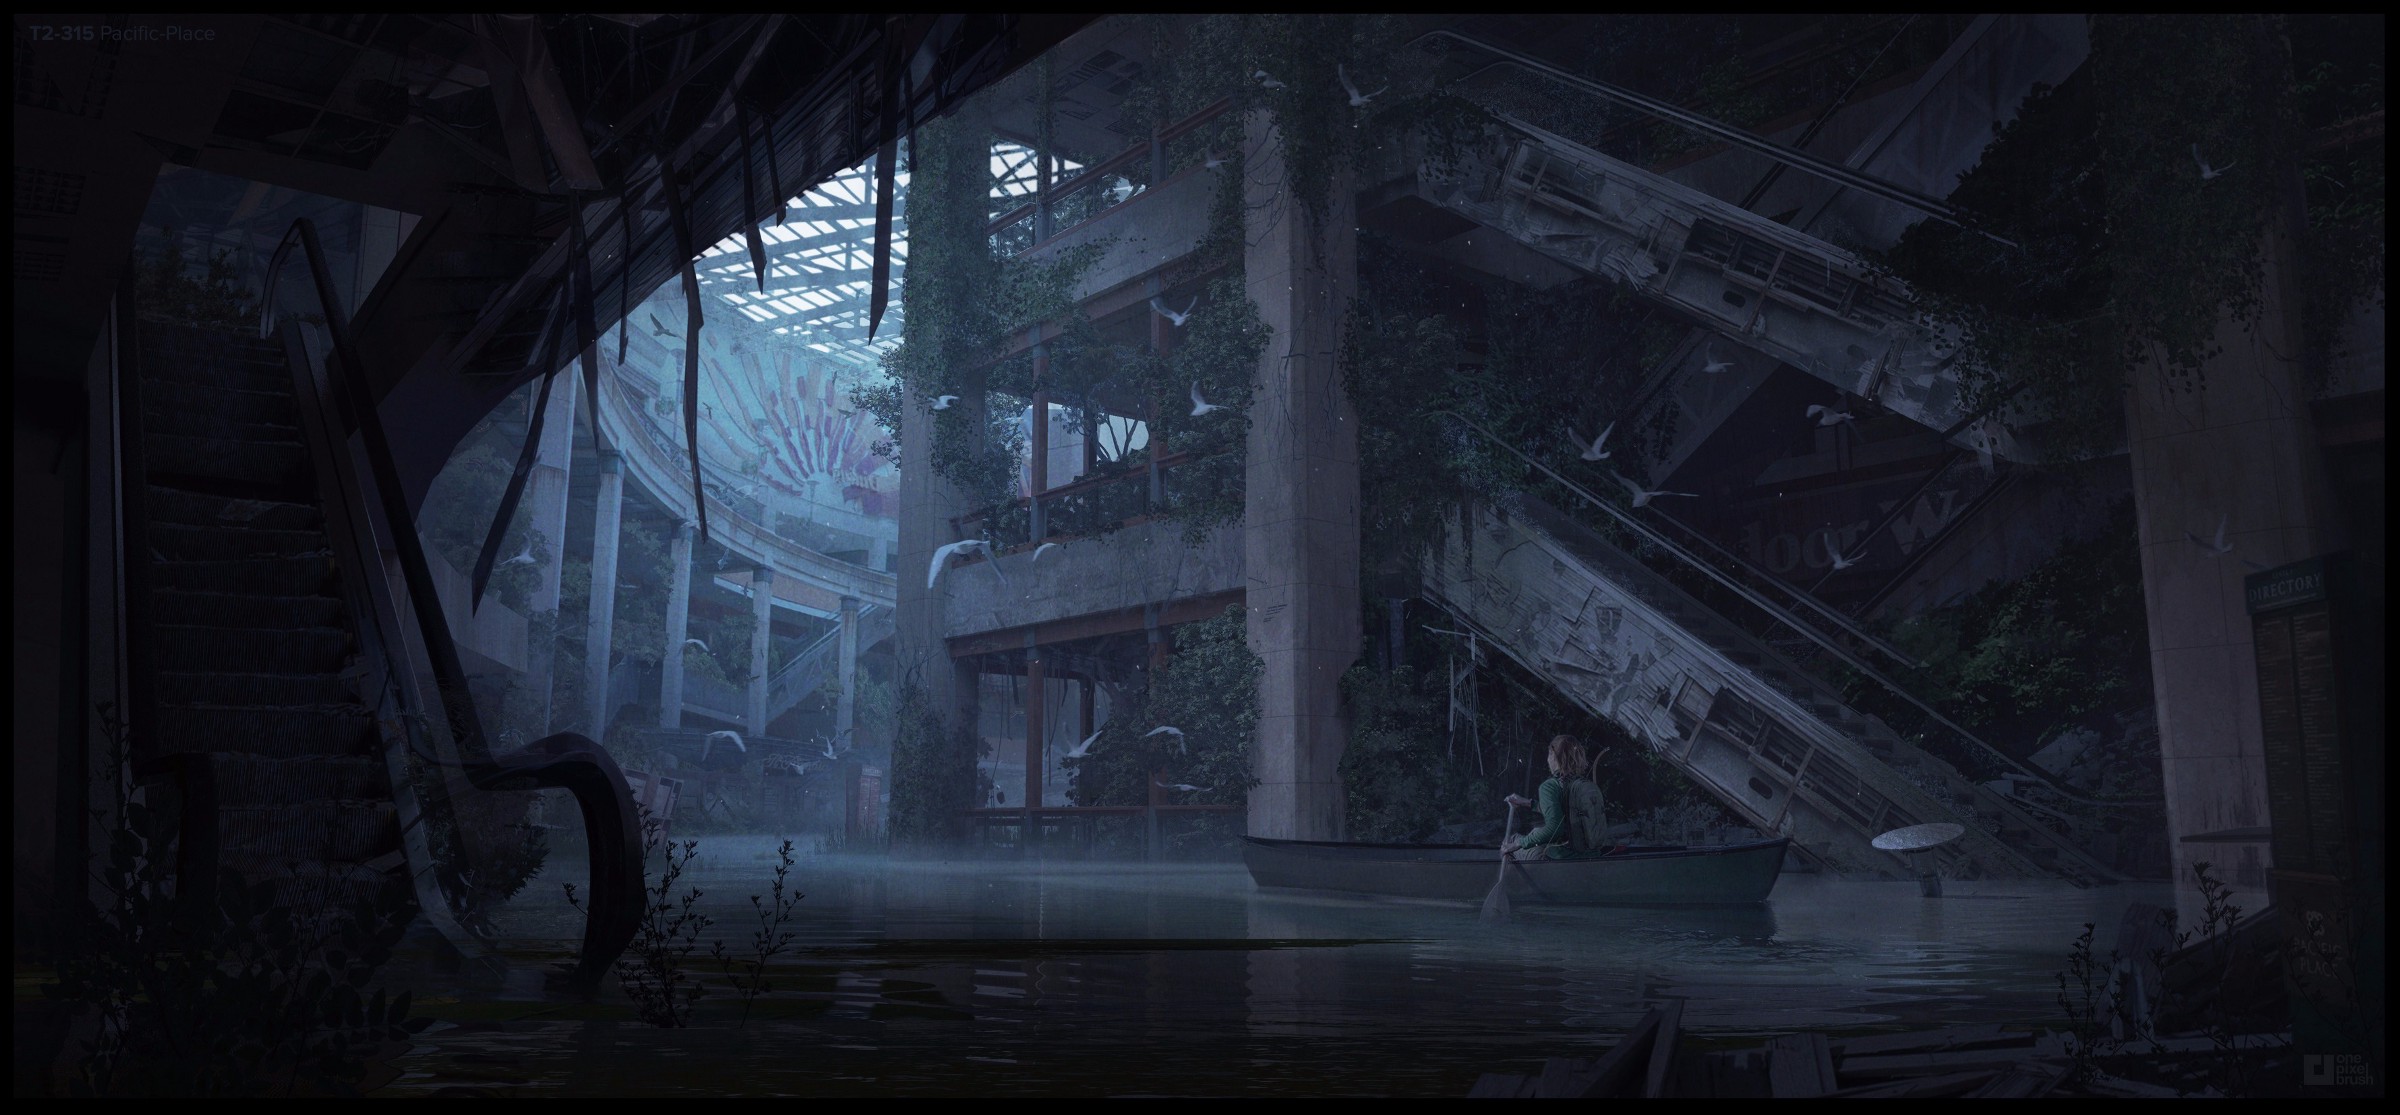 Artwork Ellie and Dog, The Last of Us Part II, Naughty Dog